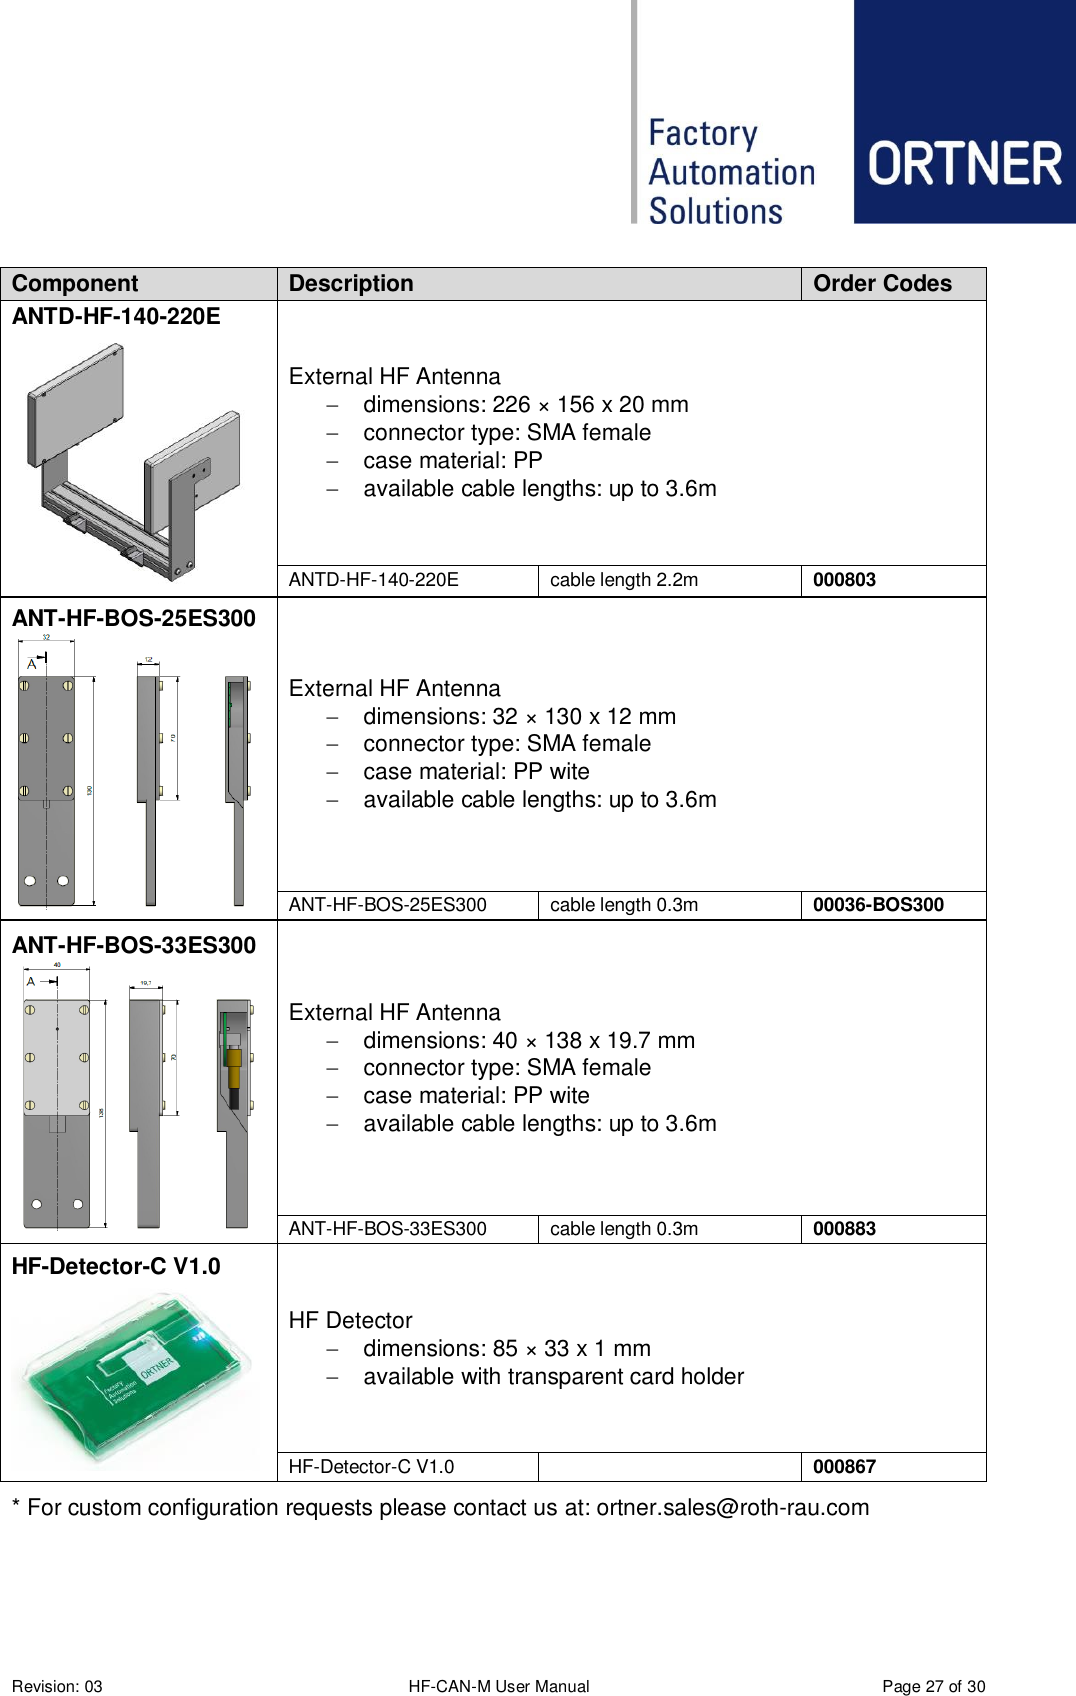  Revision: 03 HF-CAN-M User Manual  Page 27 of 30 Component Description Order Codes ANTD-HF-140-220E  External HF Antenna   dimensions: 226 × 156 x 20 mm   connector type: SMA female   case material: PP   available cable lengths: up to 3.6m ANTD-HF-140-220E cable length 2.2m 000803 ANT-HF-BOS-25ES300  External HF Antenna   dimensions: 32 × 130 x 12 mm   connector type: SMA female   case material: PP wite   available cable lengths: up to 3.6m ANT-HF-BOS-25ES300 cable length 0.3m 00036-BOS300 ANT-HF-BOS-33ES300  External HF Antenna   dimensions: 40 × 138 x 19.7 mm   connector type: SMA female   case material: PP wite   available cable lengths: up to 3.6m ANT-HF-BOS-33ES300 cable length 0.3m 000883 HF-Detector-C V1.0  HF Detector   dimensions: 85 × 33 x 1 mm   available with transparent card holder HF-Detector-C V1.0  000867 * For custom configuration requests please contact us at: ortner.sales@roth-rau.com    